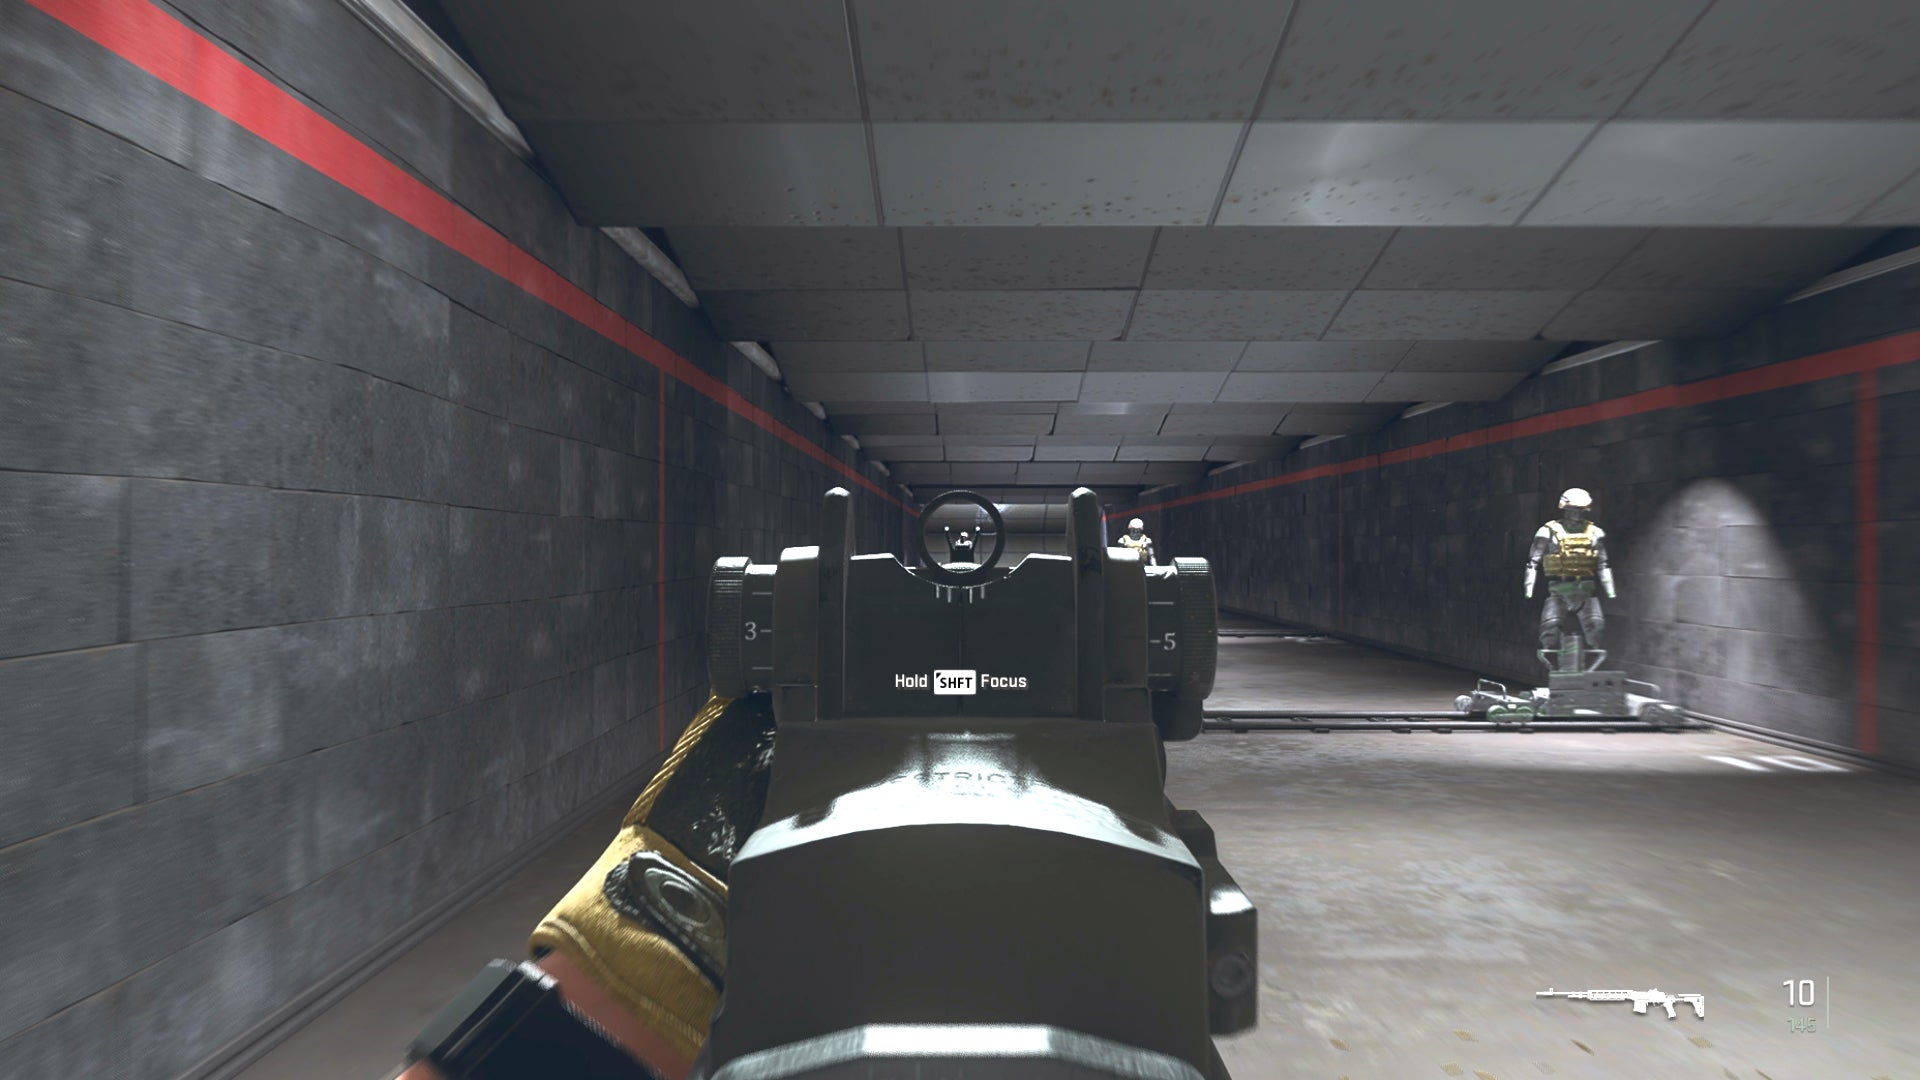 The player in Warzone 2.0 aims at a training dummy with the EBR-14 ironsights.